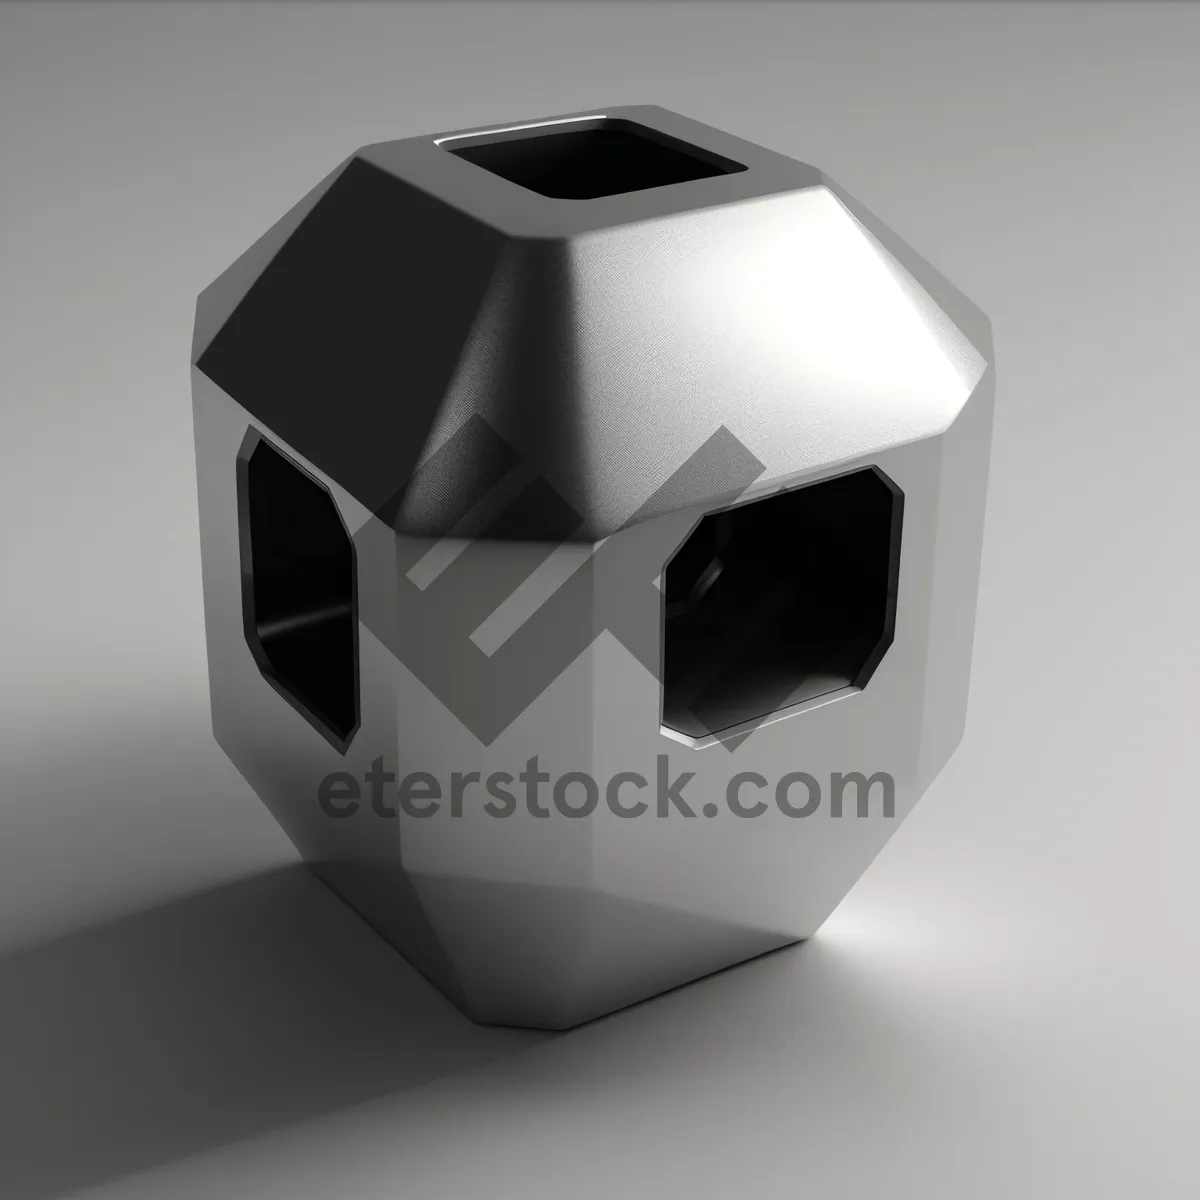 Picture of 3D Football Sphere Sharpener